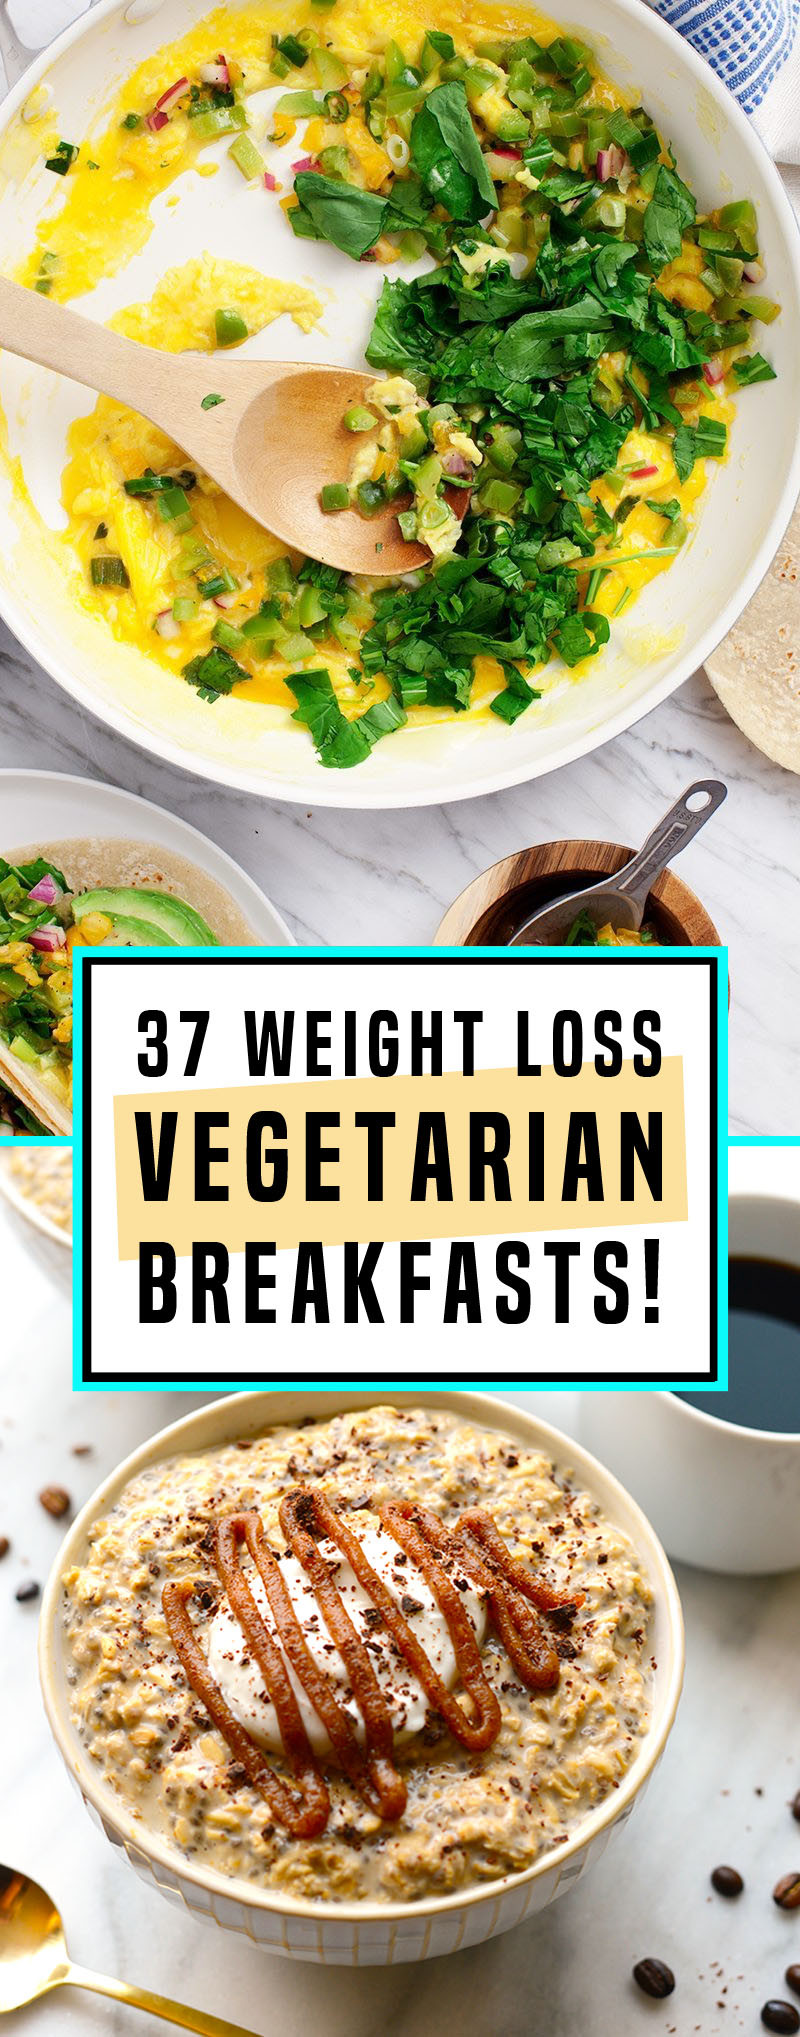 Healthy Vegetarian Breakfast For Weight Loss
 37 Ve arian Breakfasts For The Perfect Weight Loss Start